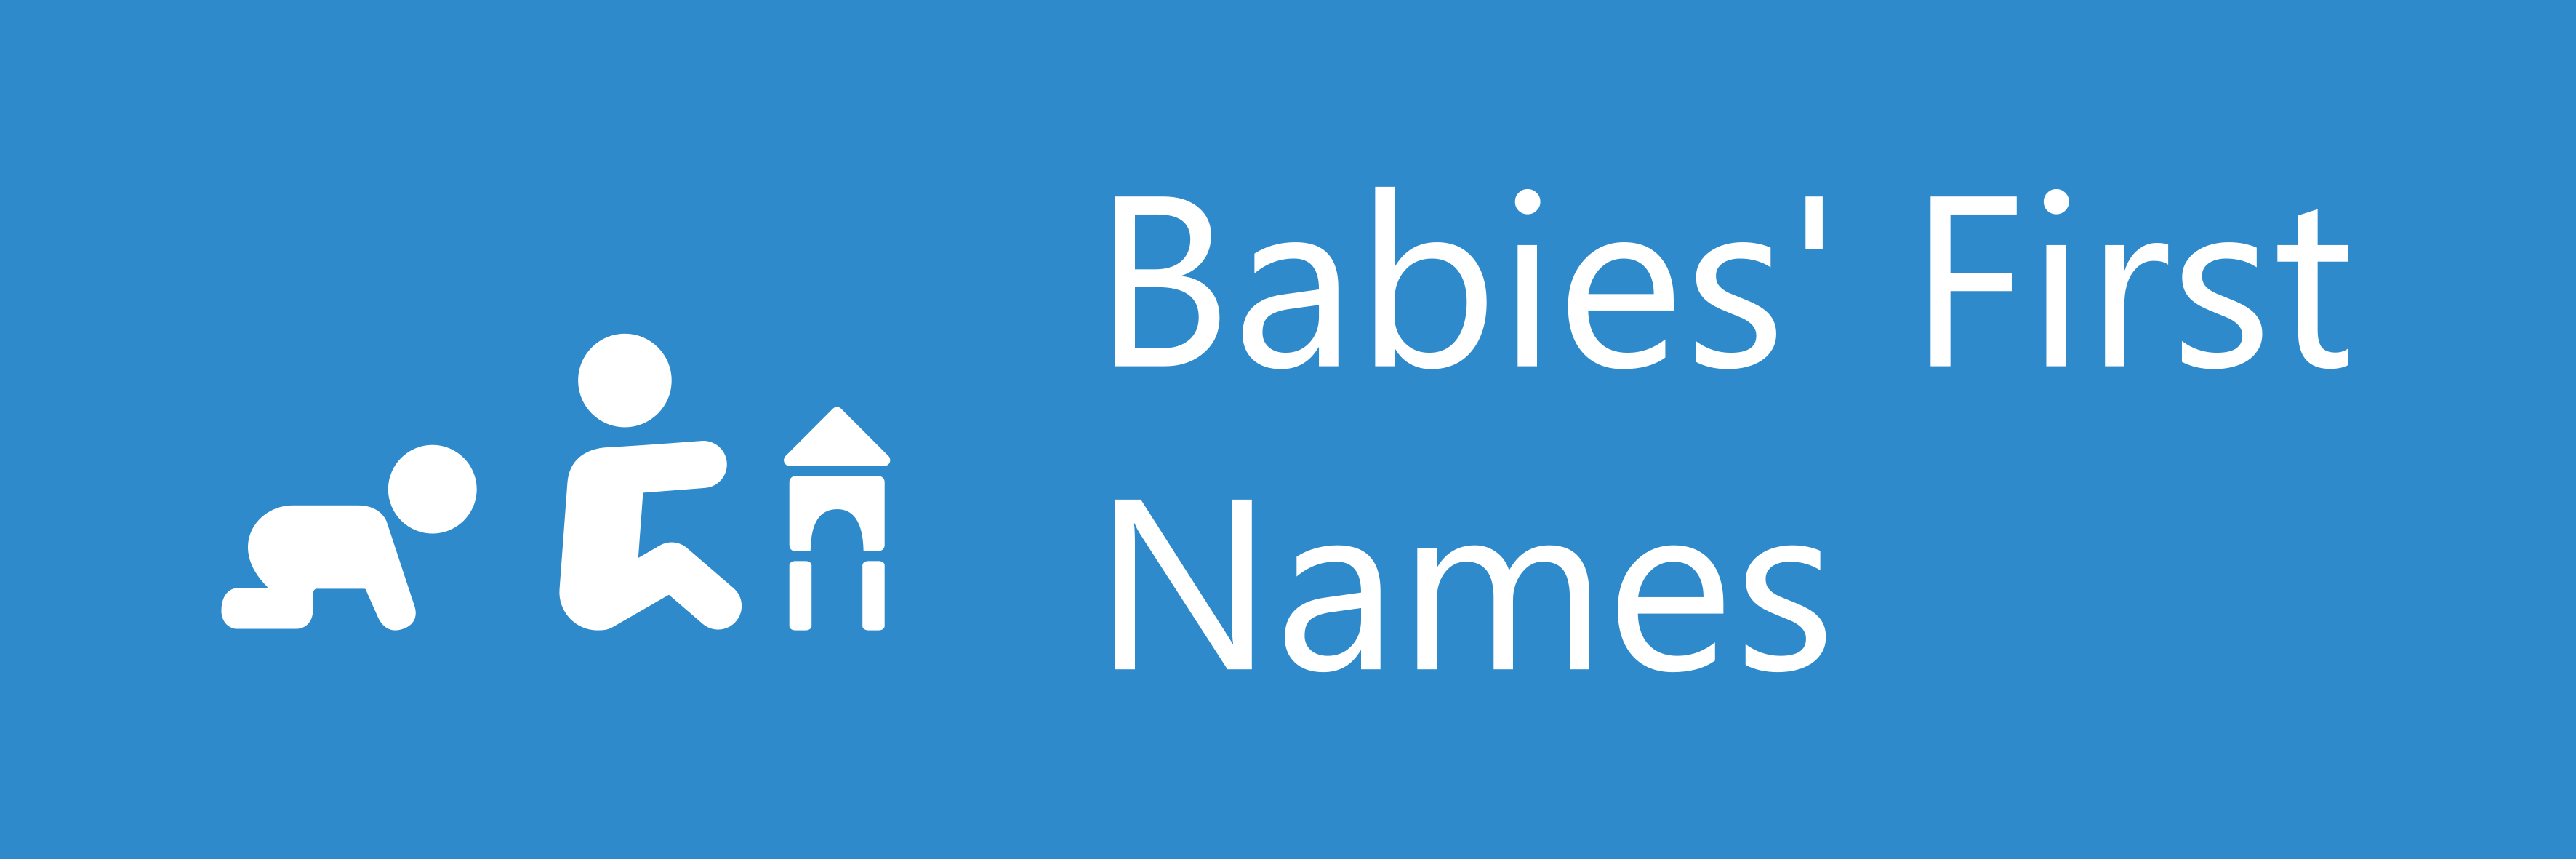 Babies' First Names 2018